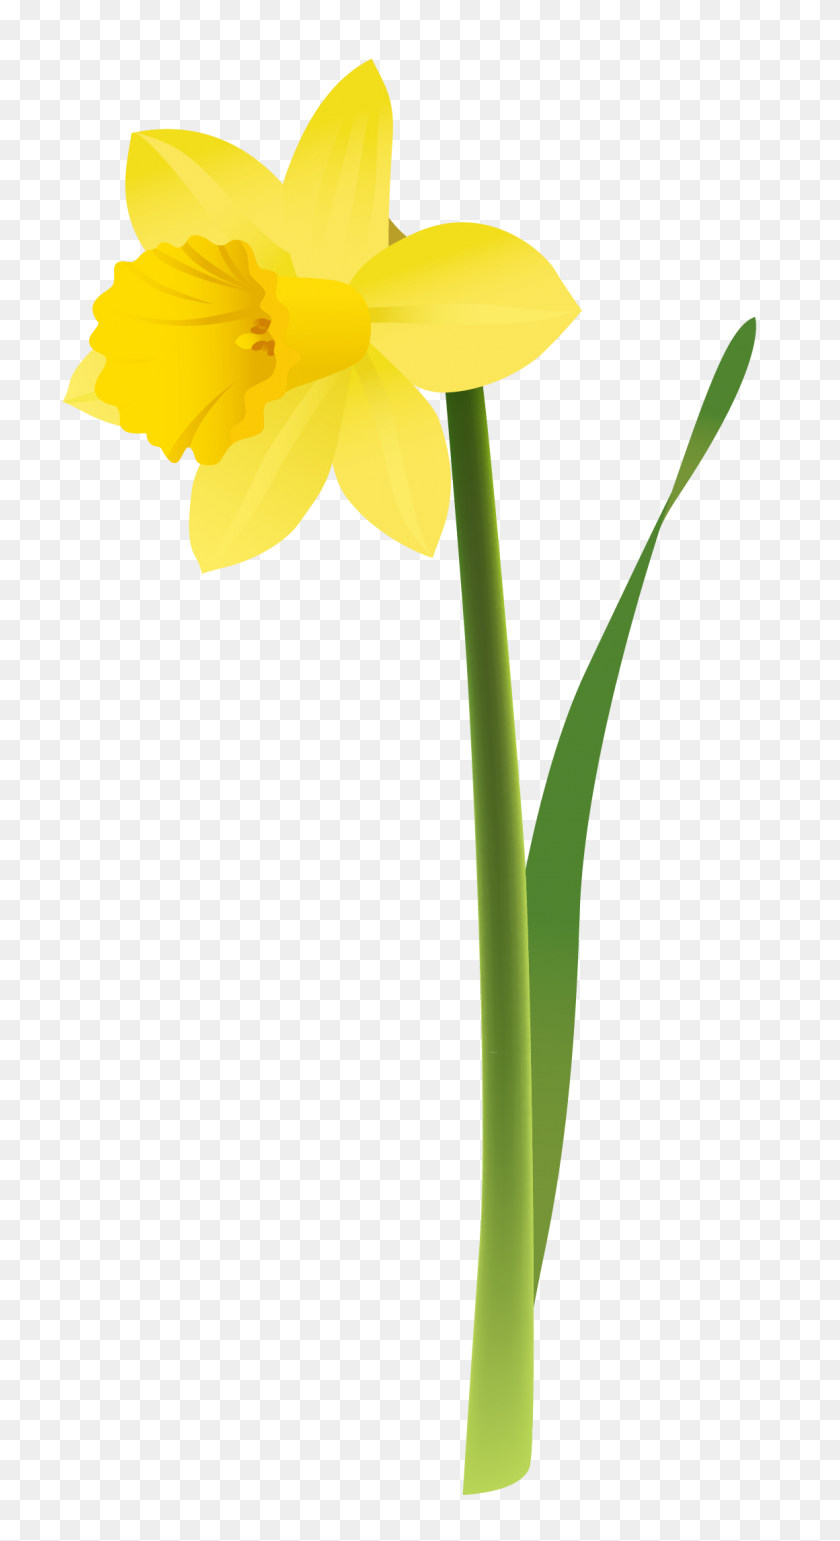 Easter Clipart Daffodil - Easter Clipart Transparent – Stunning free ...